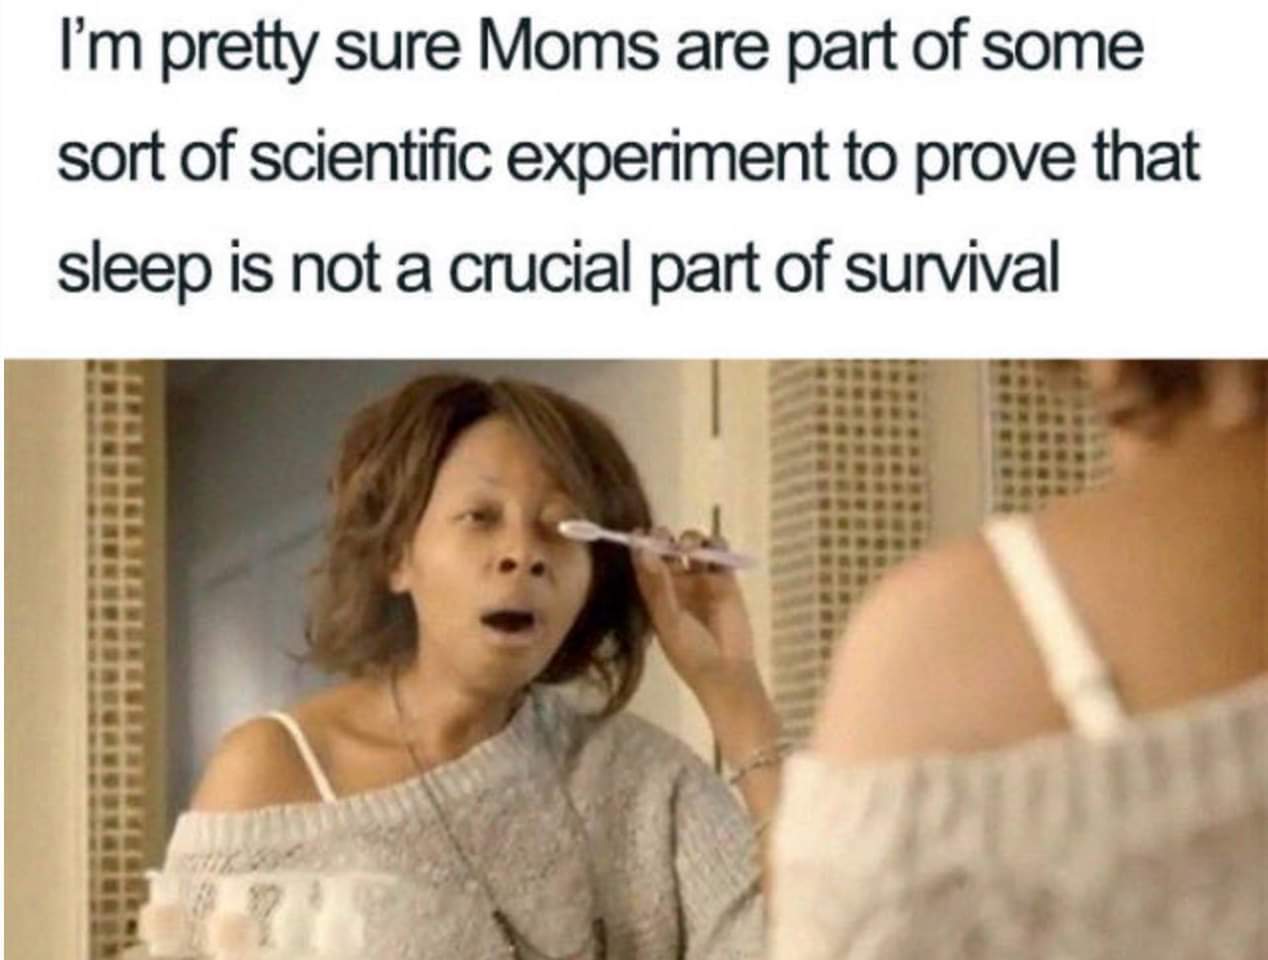 dank meme - memes moms - I'm pretty sure Moms are part of some sort of scientific experiment to prove that sleep is not a crucial part of survival